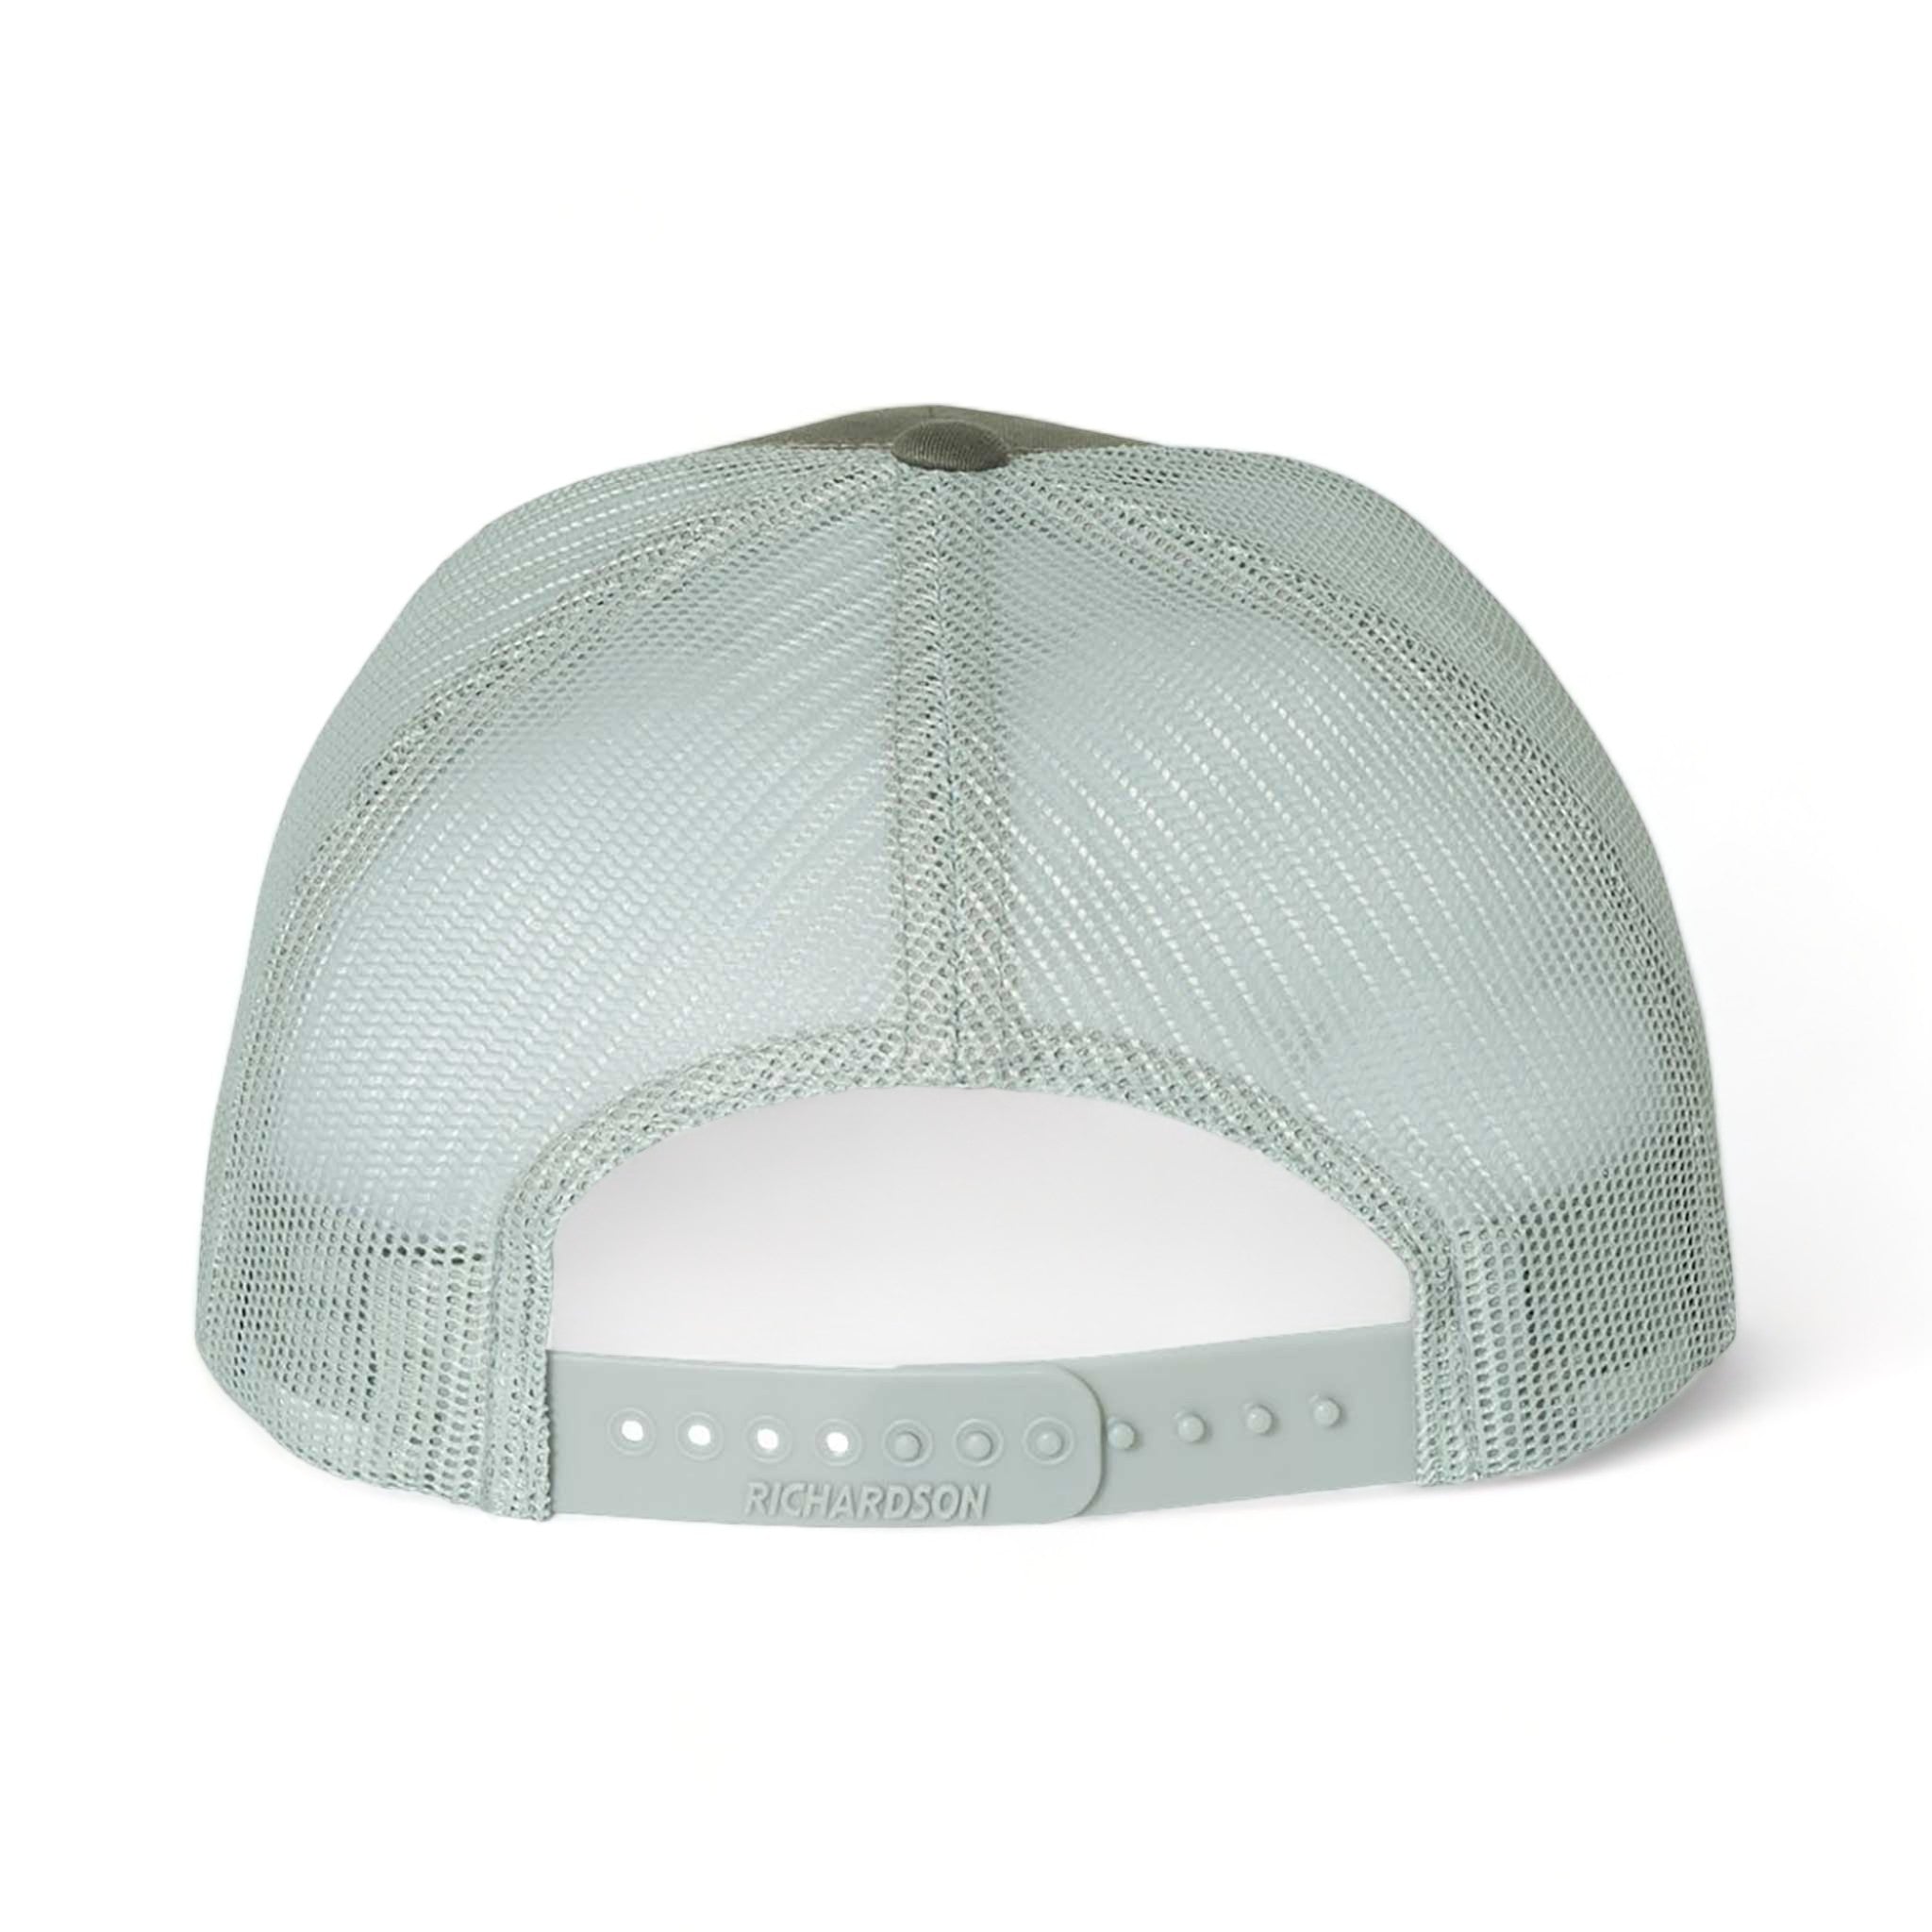 Back view of Richardson 112FP custom hat in beetle and quarry